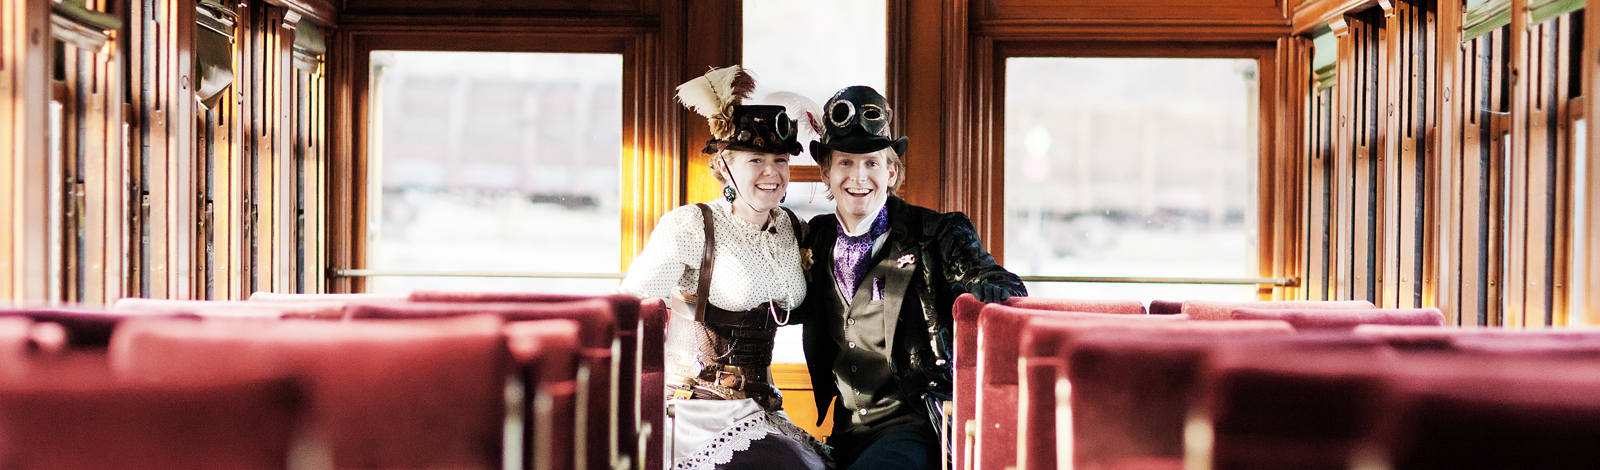 Steampunk at the Station: In Photos